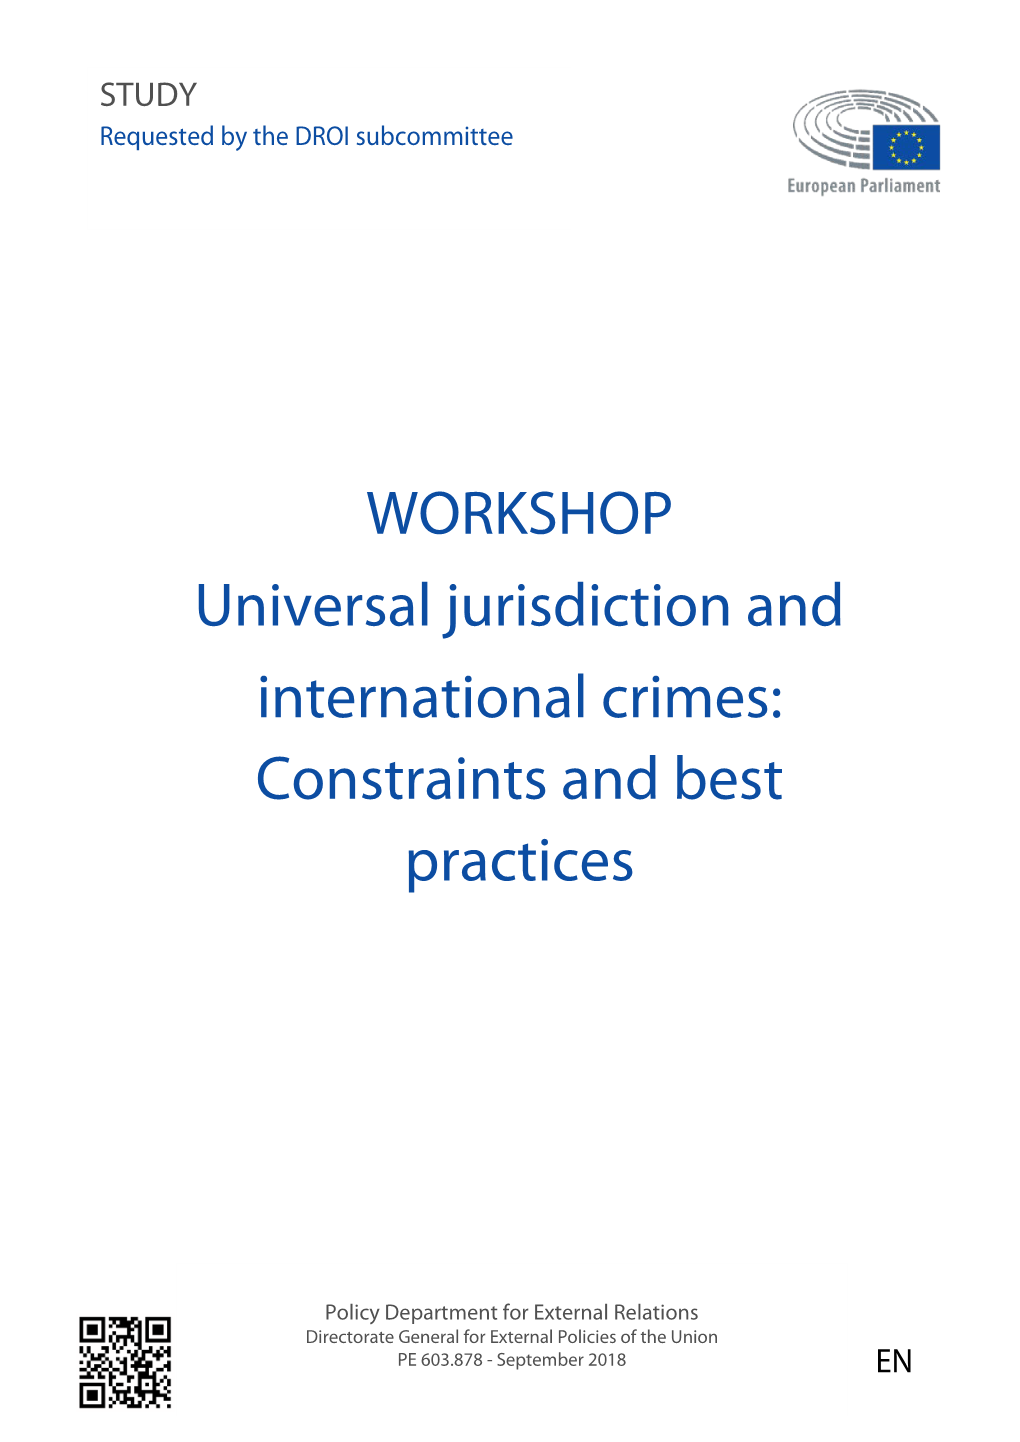 Universal Jurisdiction and International Crimes: Constraints and Best Practices